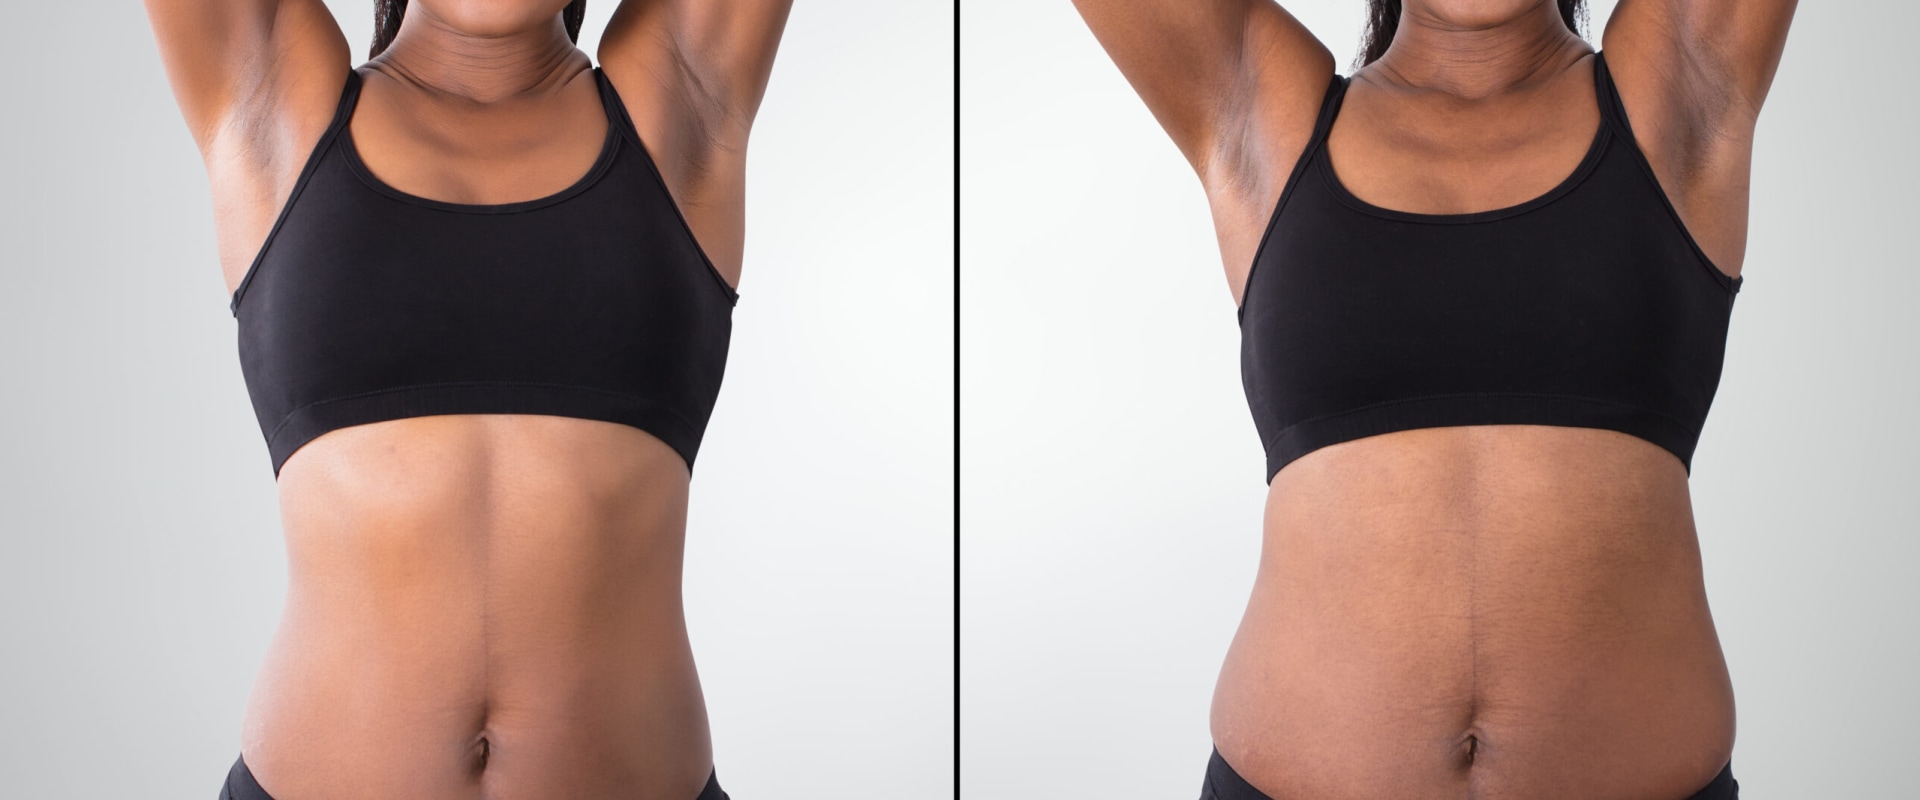 Does Fat Reduction Really Work?